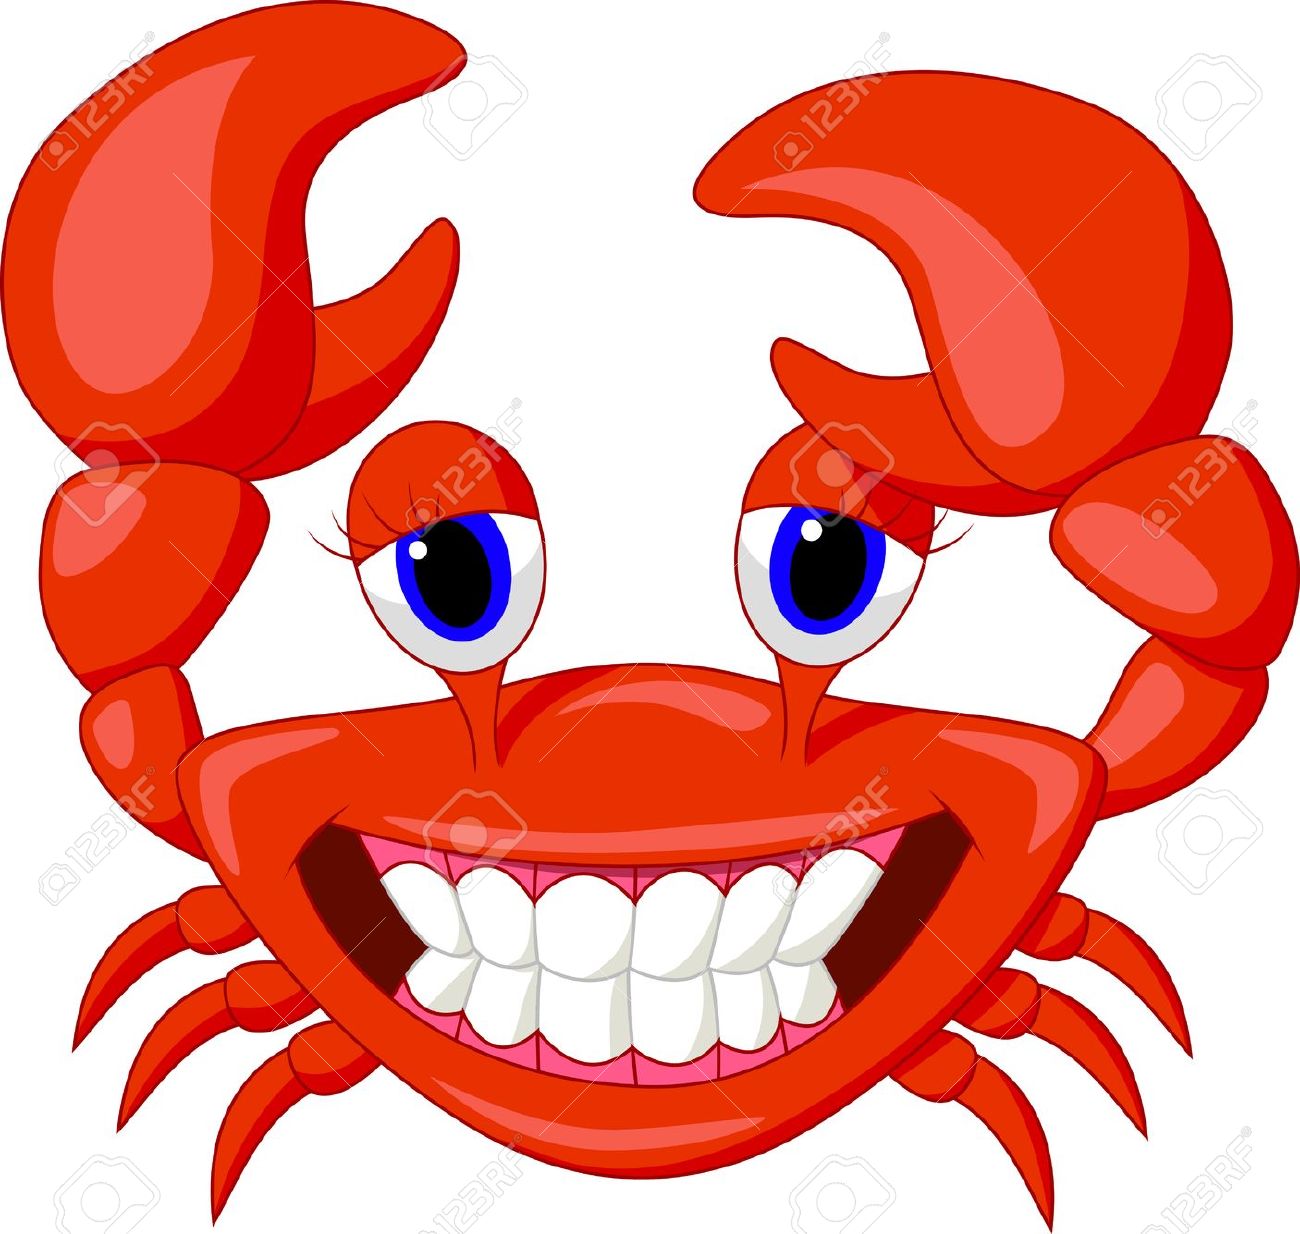 Mesmerizing crab images free kids flairs banese drawing what clipart